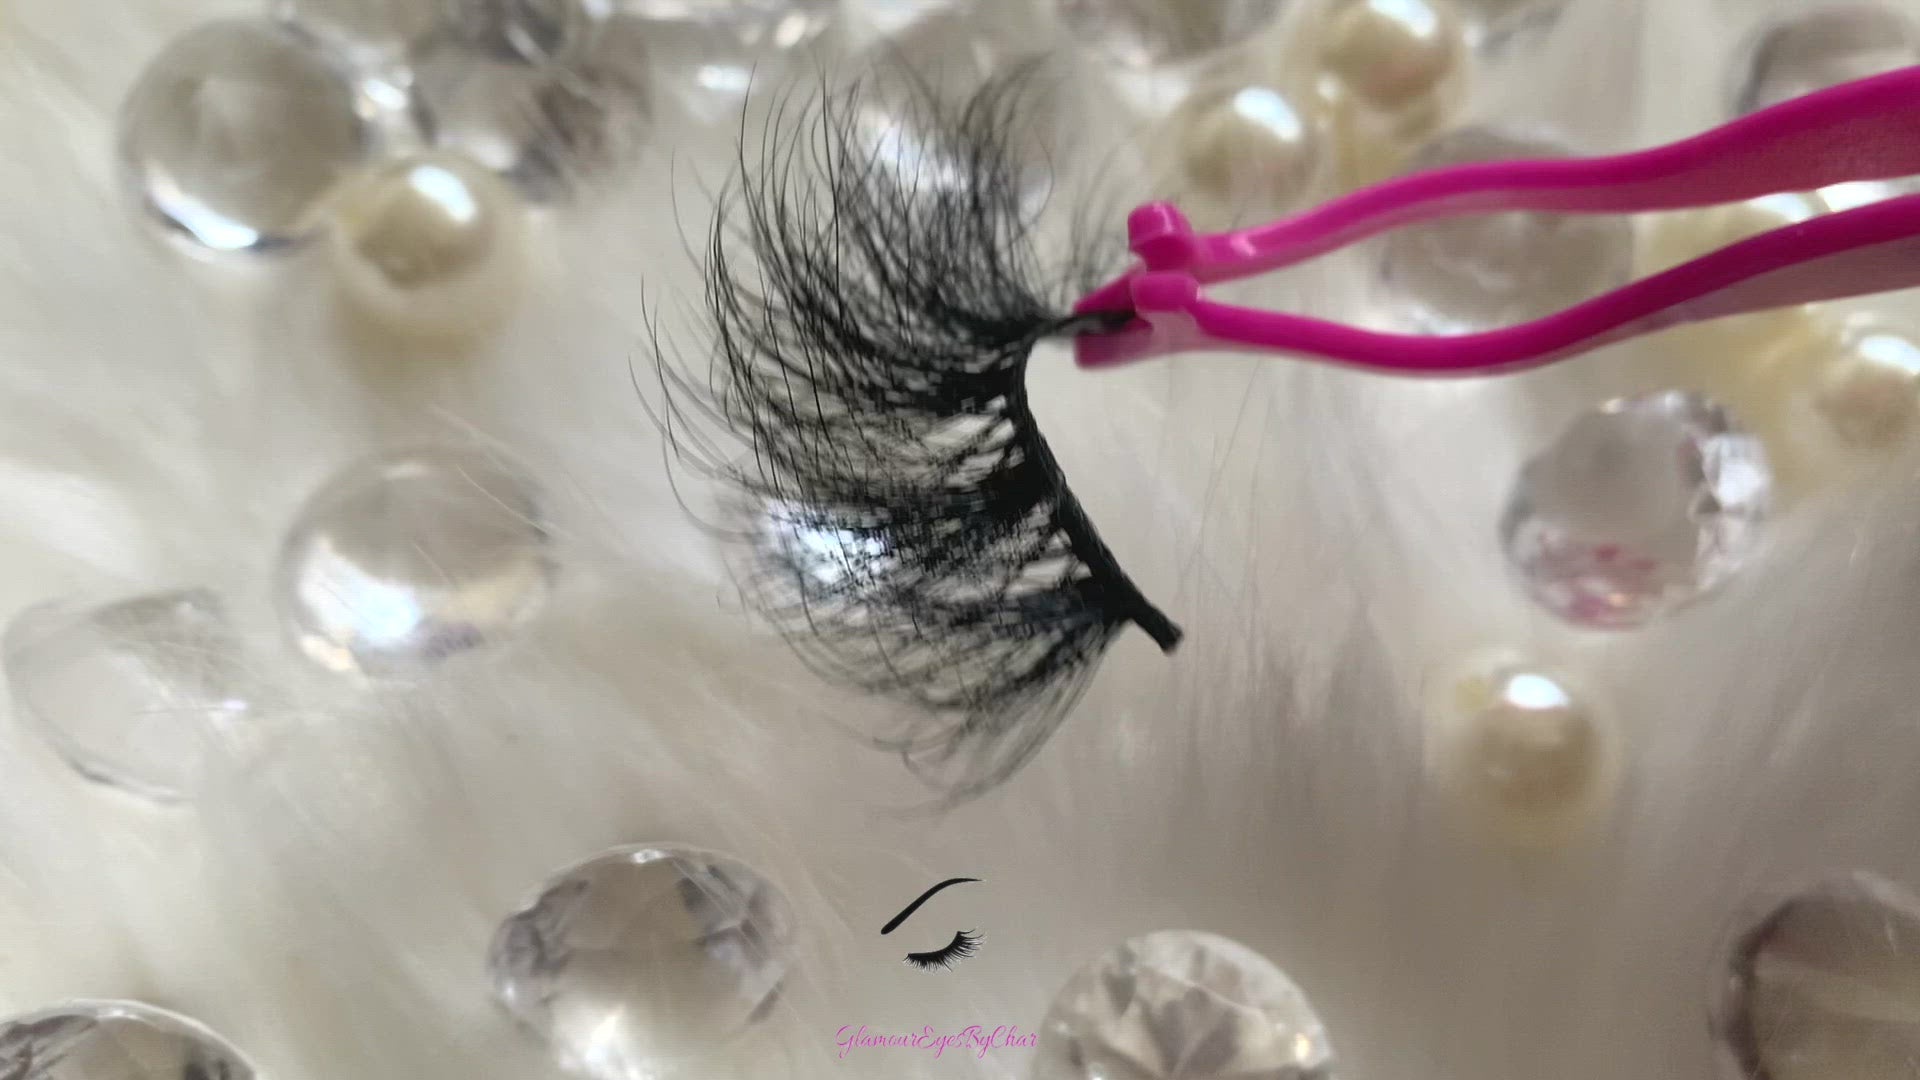 These 5D luxurious mink lashes are called Goddess and are 25mm in length. They are very dramatic, wispy, have a criss cross style, and comfortable to wear on the lids. The thin lashband, makes the application process a breeze. Goddess are suitable for dramatic eye looks and can be worn up to 25 times if handled with care.